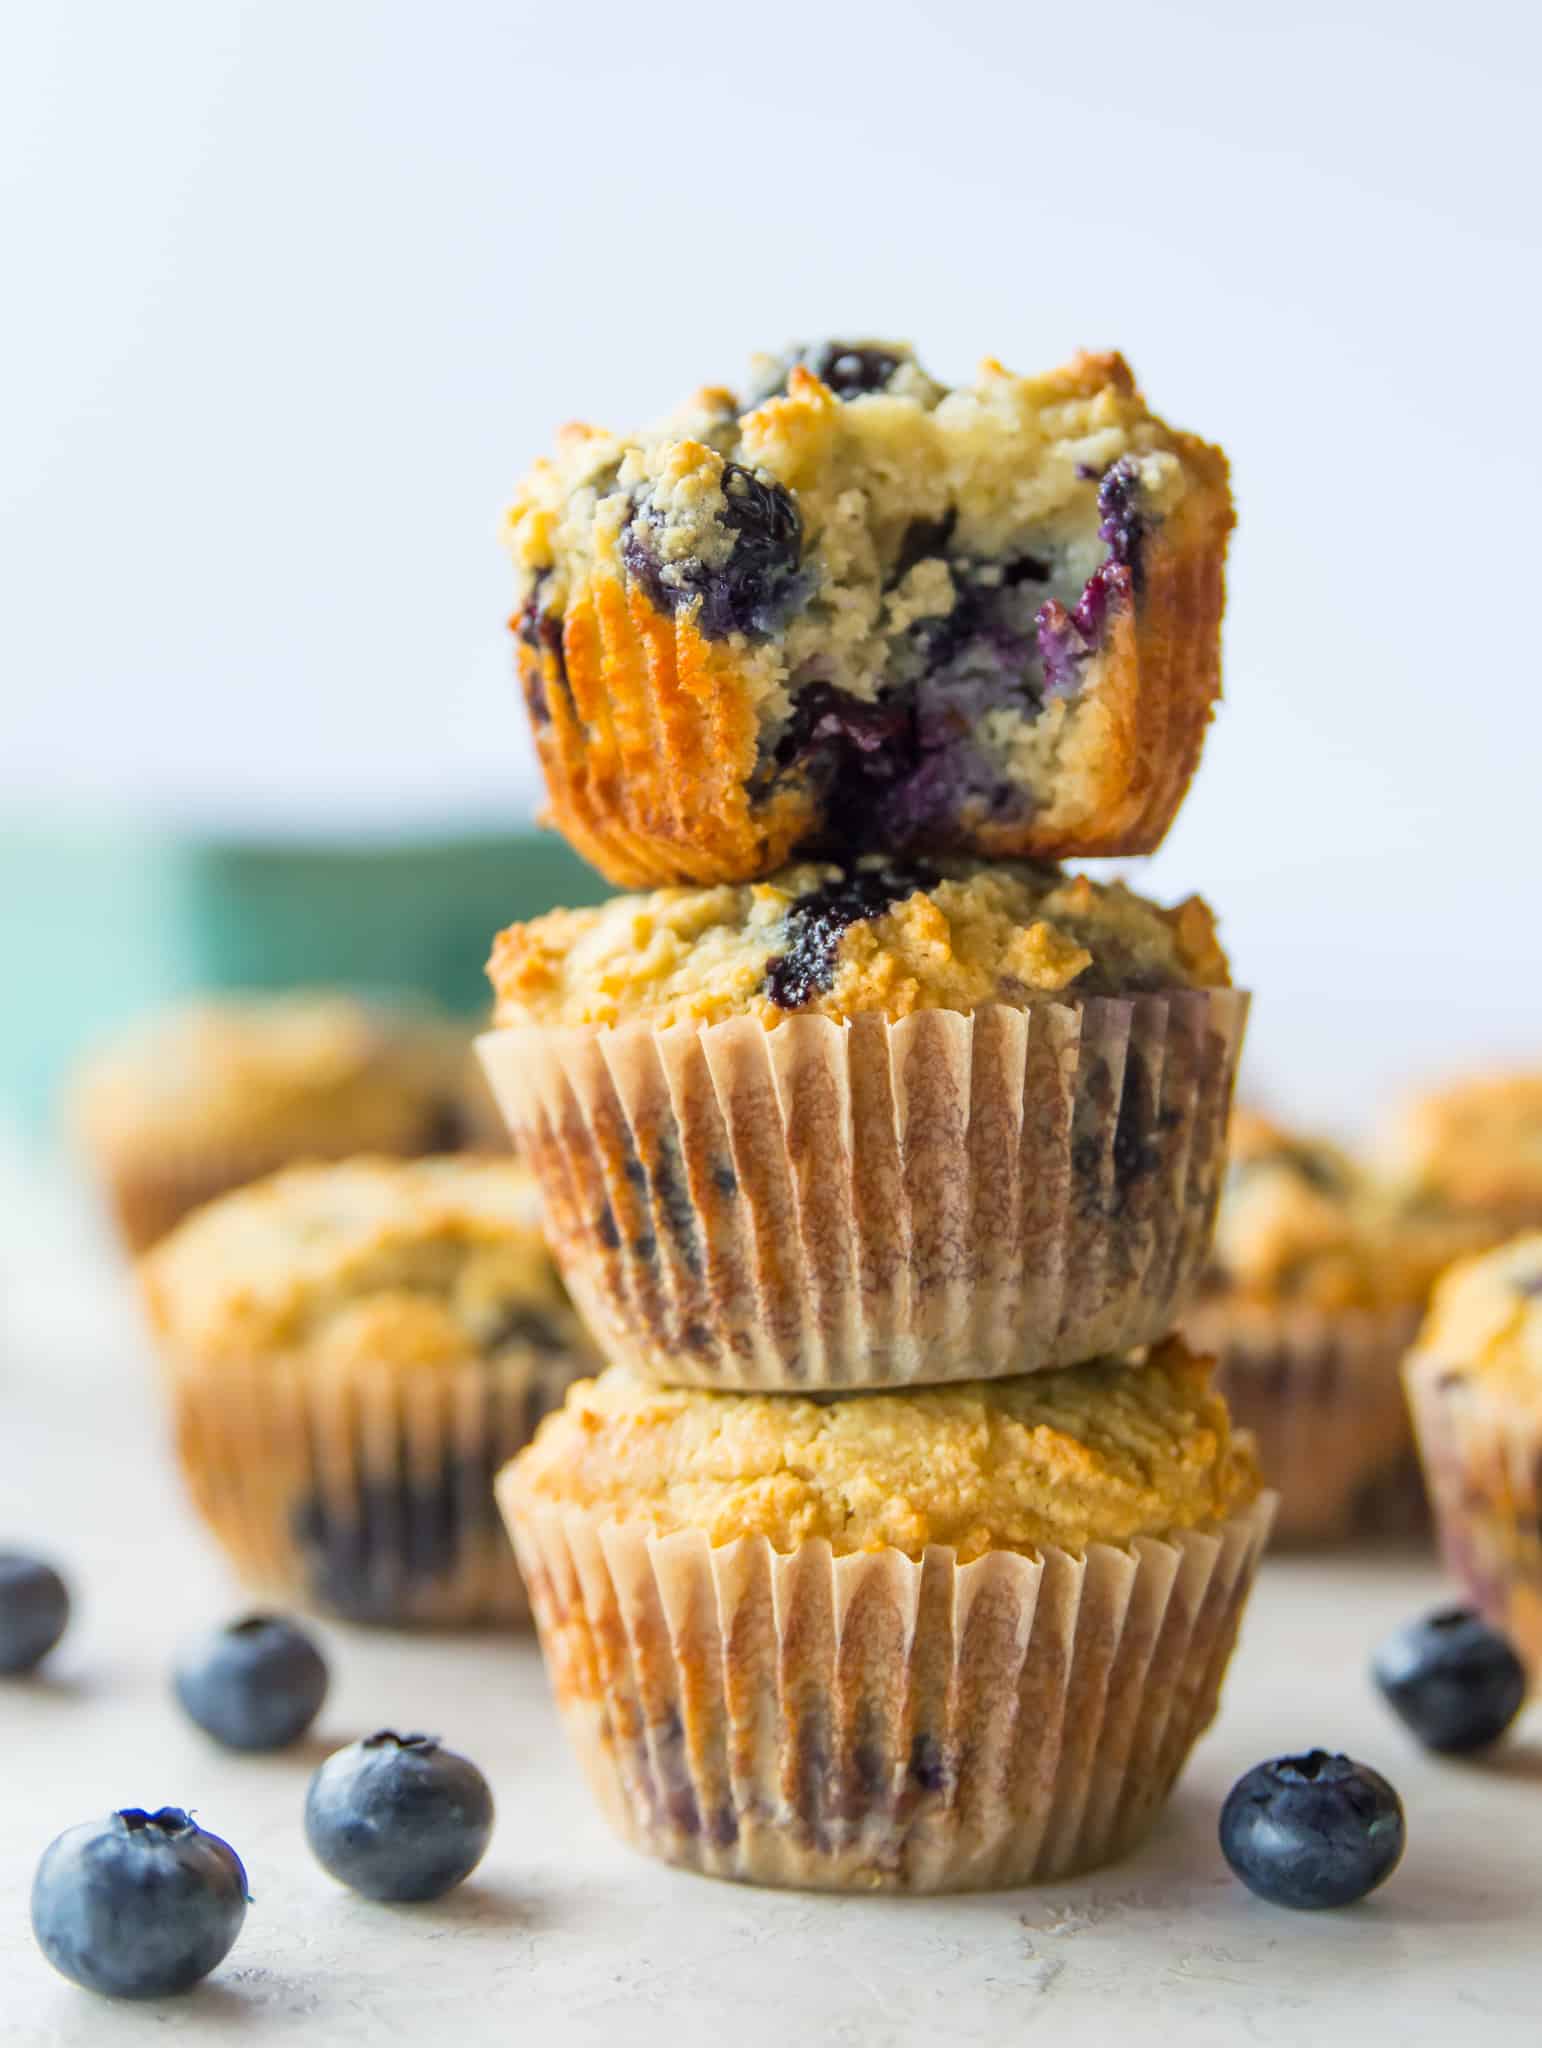 A stack of three lemon blueberry muffins, with a bite out of the top muffin.